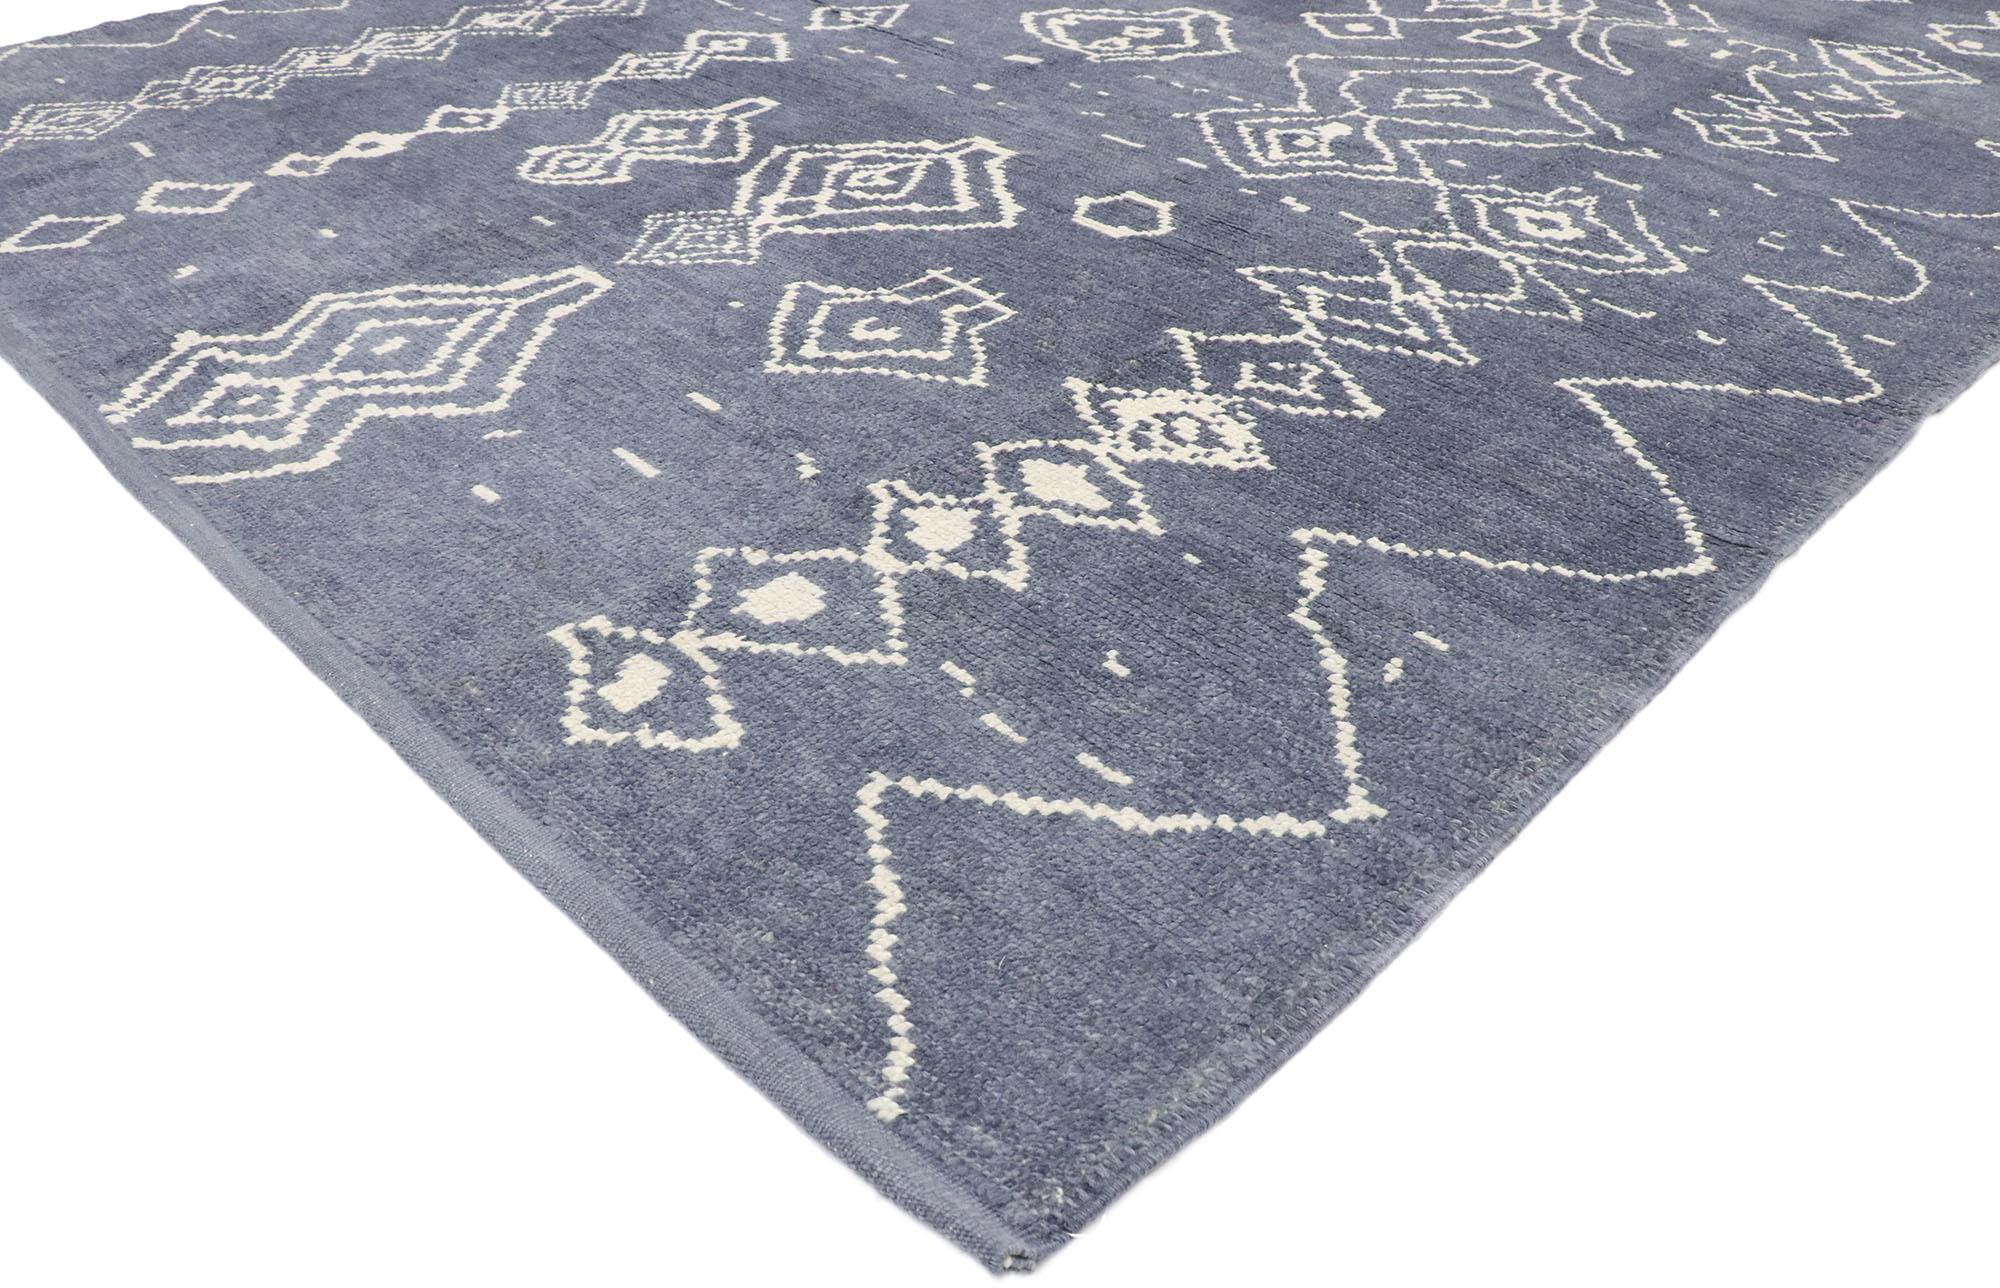 53448, new contemporary Moroccan style rug with Tribal design. With its tribal style, incredible detail and texture, this hand knotted wool contemporary Moroccan rug is a captivating vision of woven beauty and a joy to walk upon. The abrashed dark